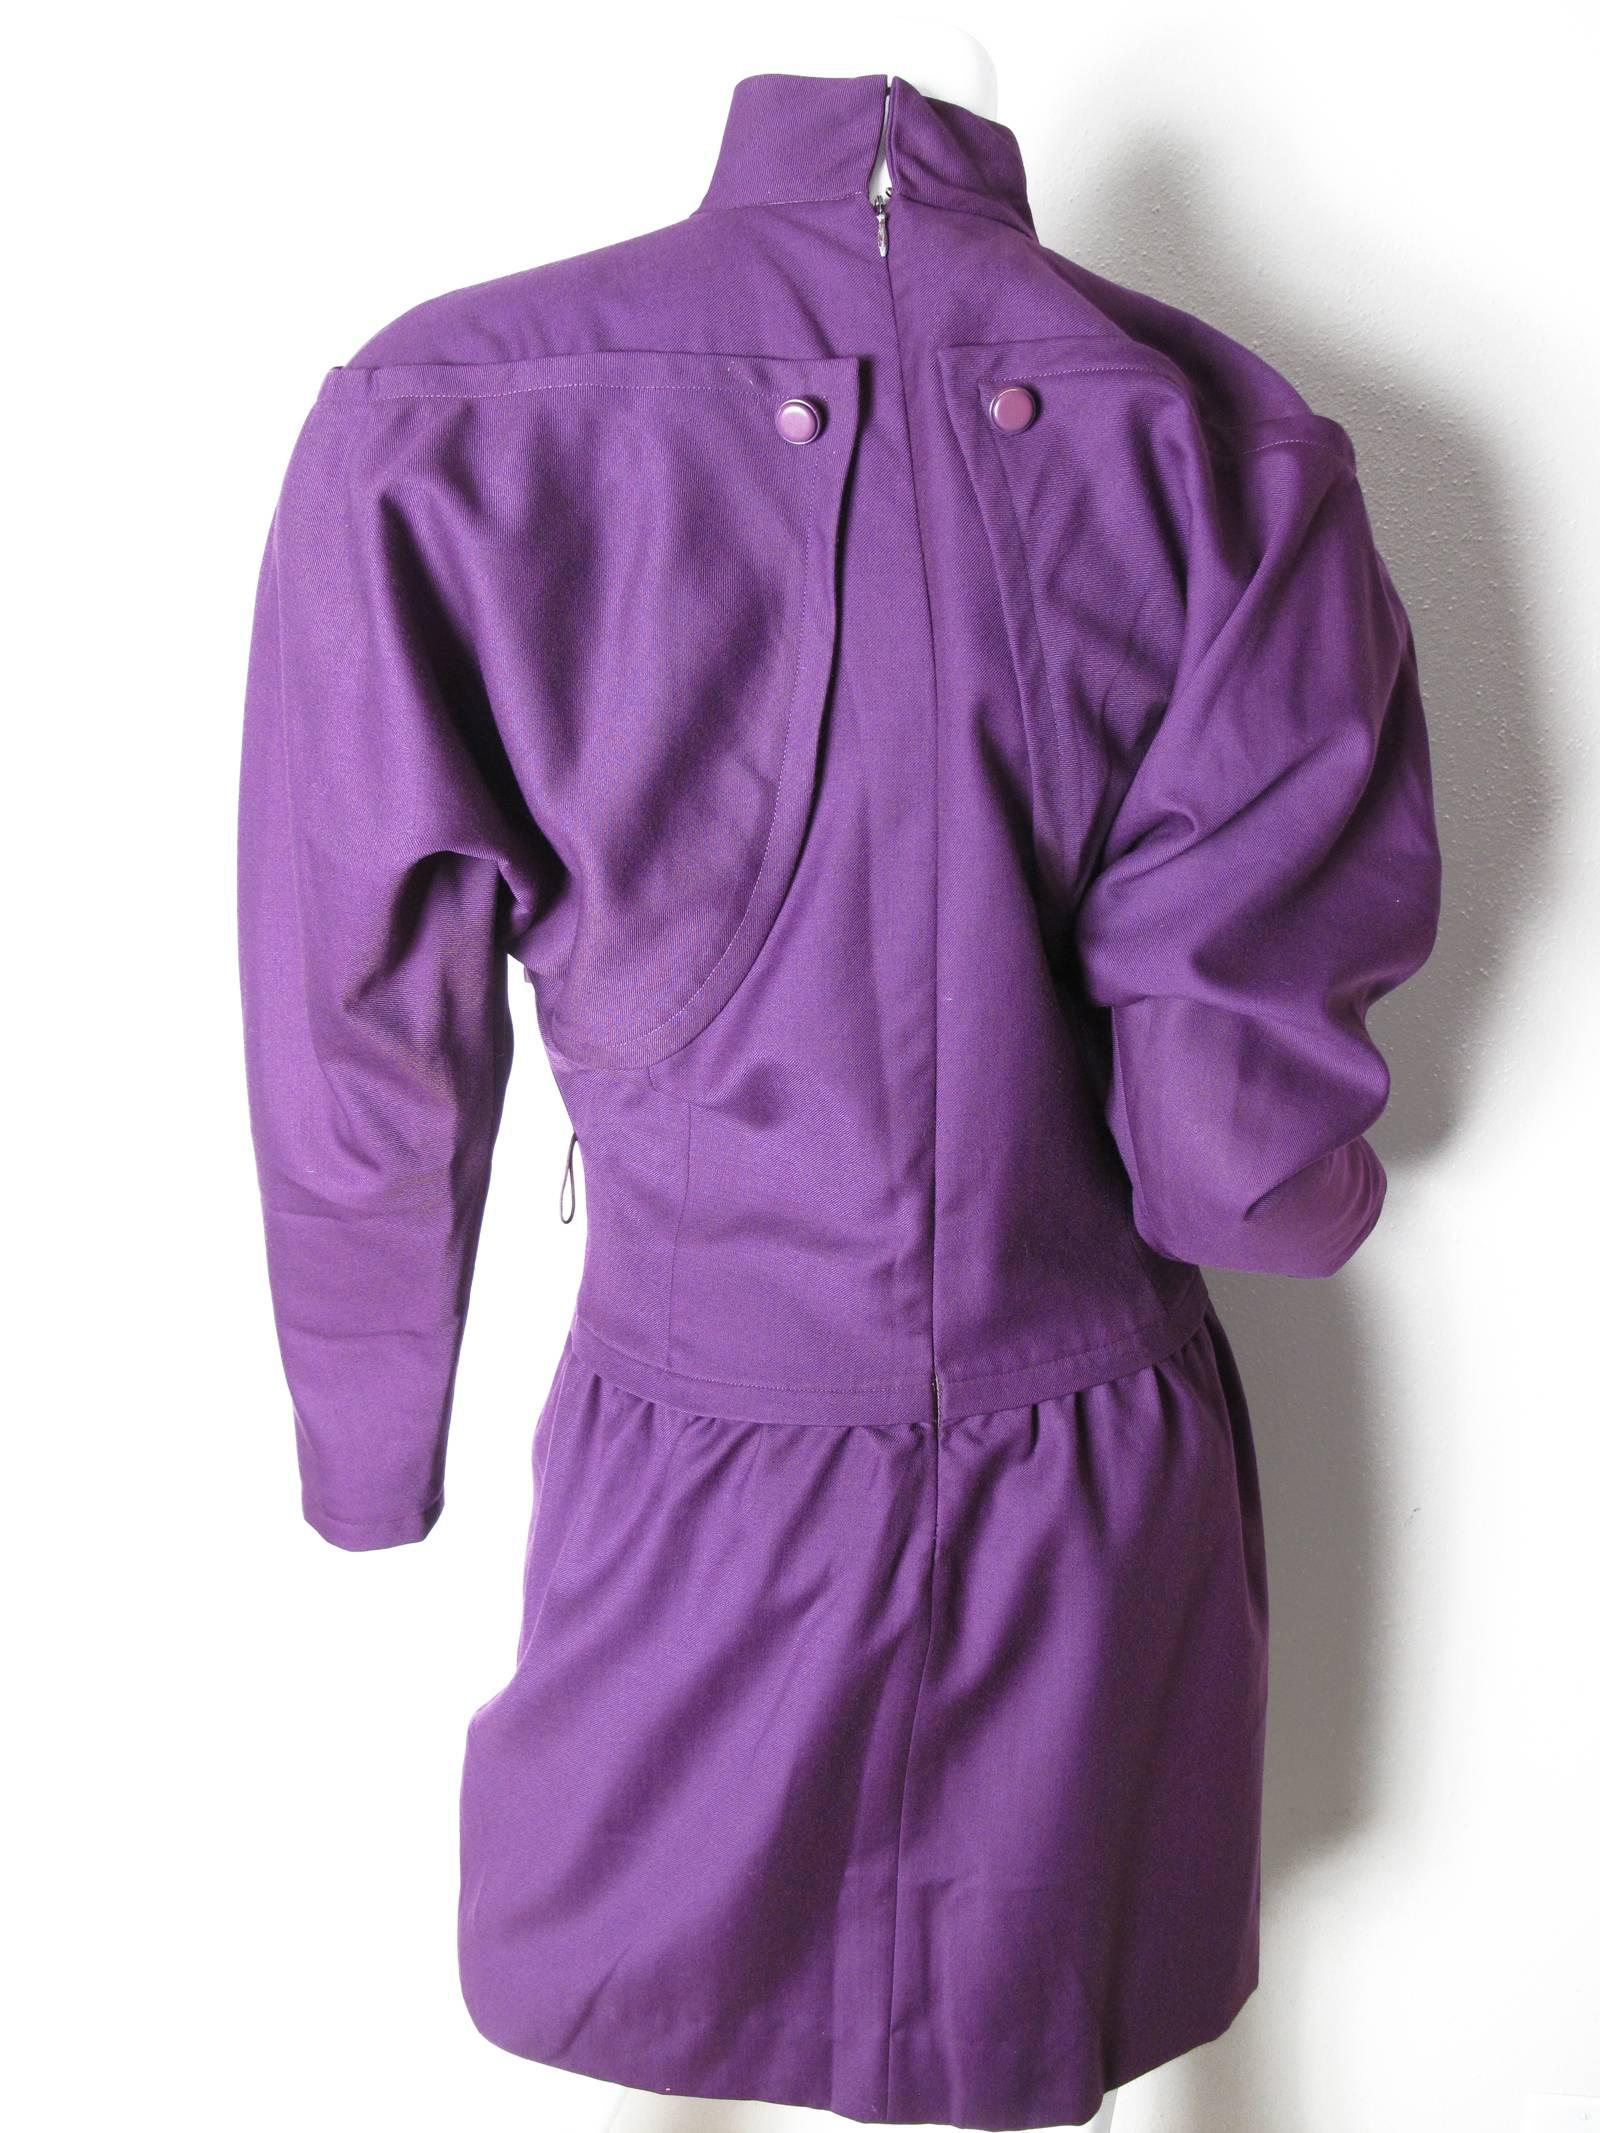 1980s Courreges purple wool dress.  Condition :Excellent.  Size 00 or small
We accept returns for refund, please see our terms.  We offer free ground shipping within the US.  Please let us know if you have any questions. 